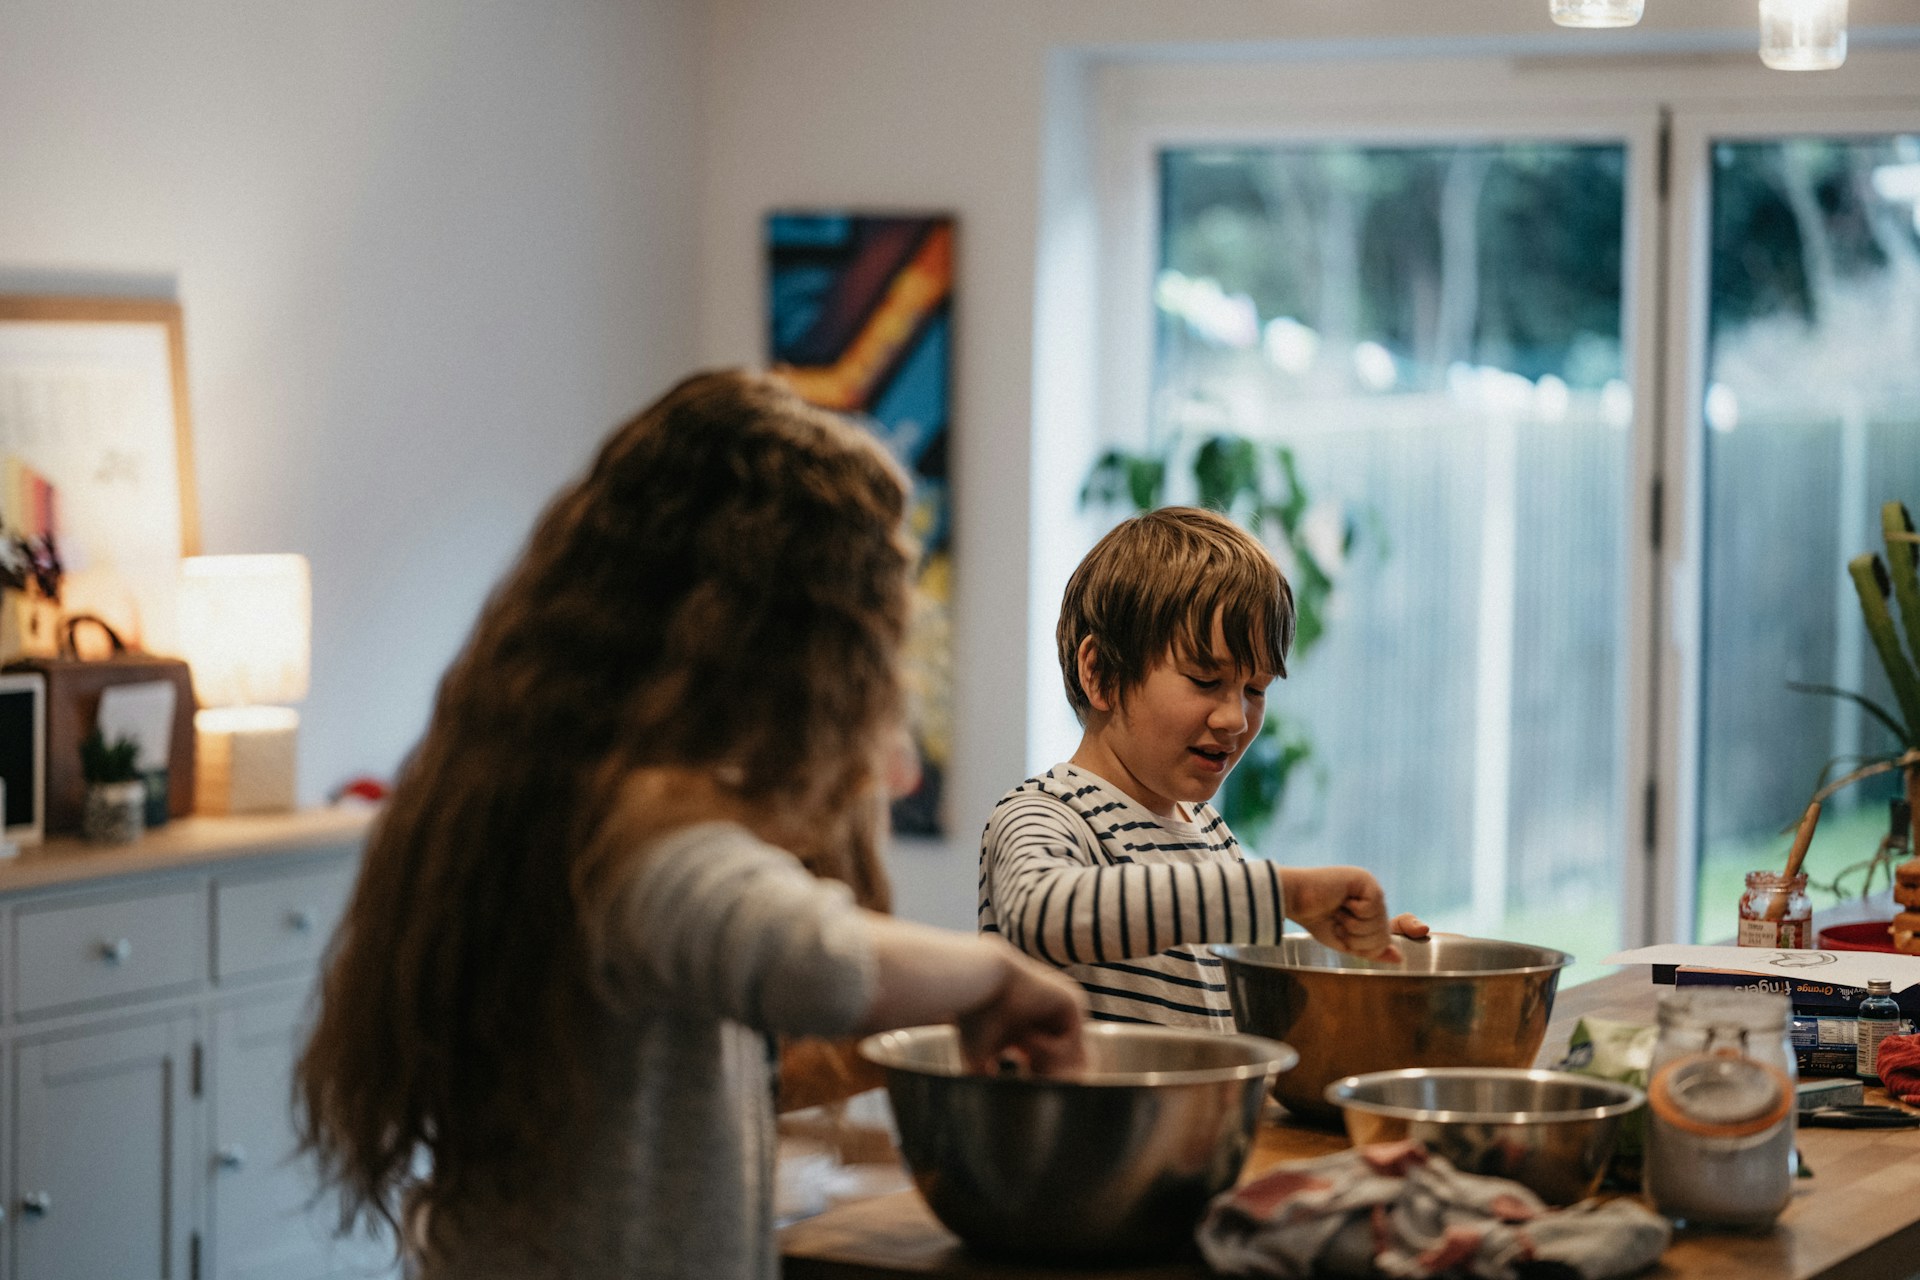 Whether it's laundry, cooking, or helping around the house, take a moment to encourage your child to learn some new basic life skills that will help them out in life. It's a great time to do so as they finally have some time to dedicate towards that!